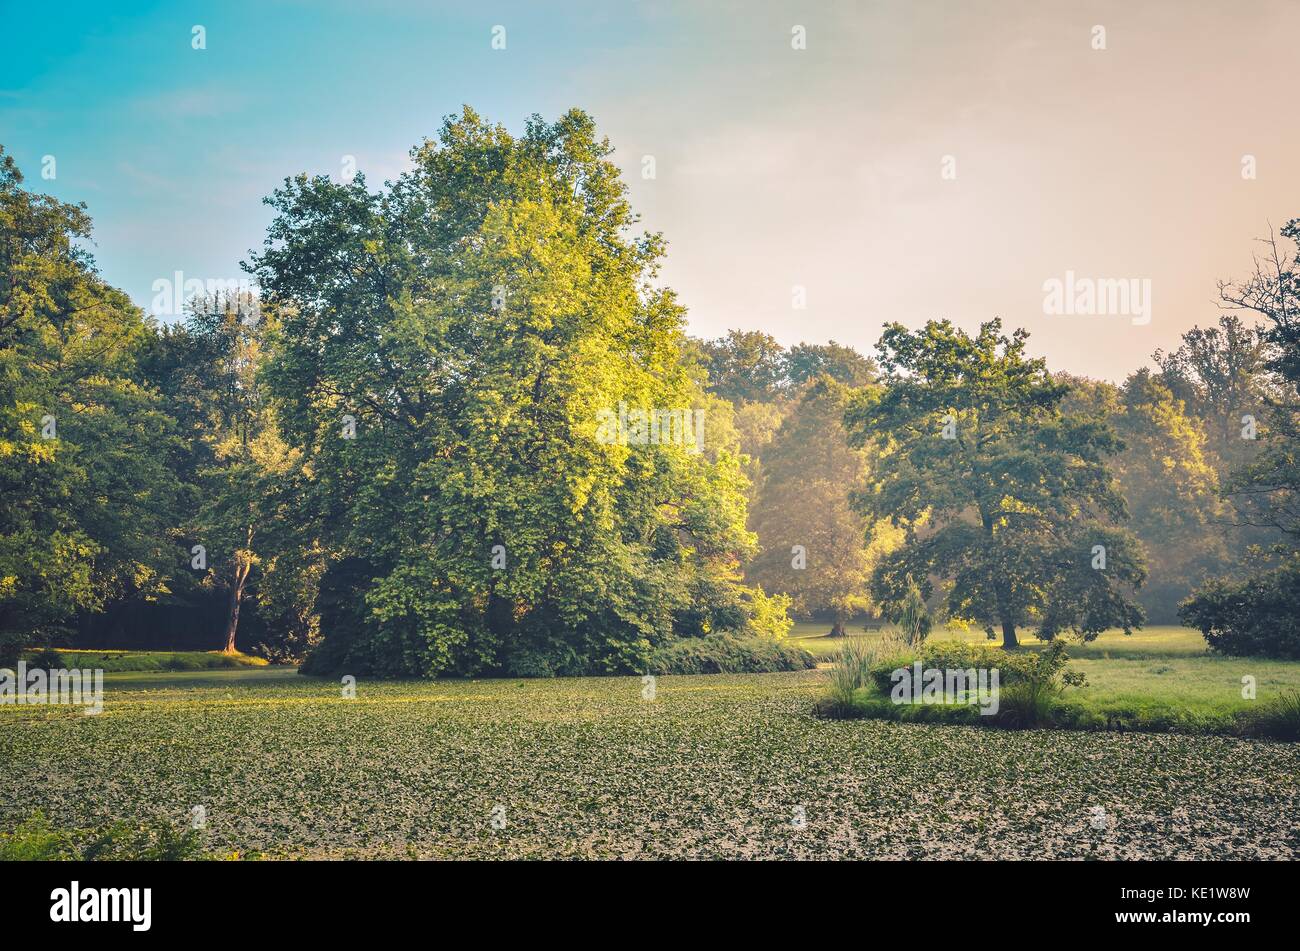 Urban summer morning landscape. Pond full of green leaves in the castle park in Pszczyna, Poland. Stock Photo